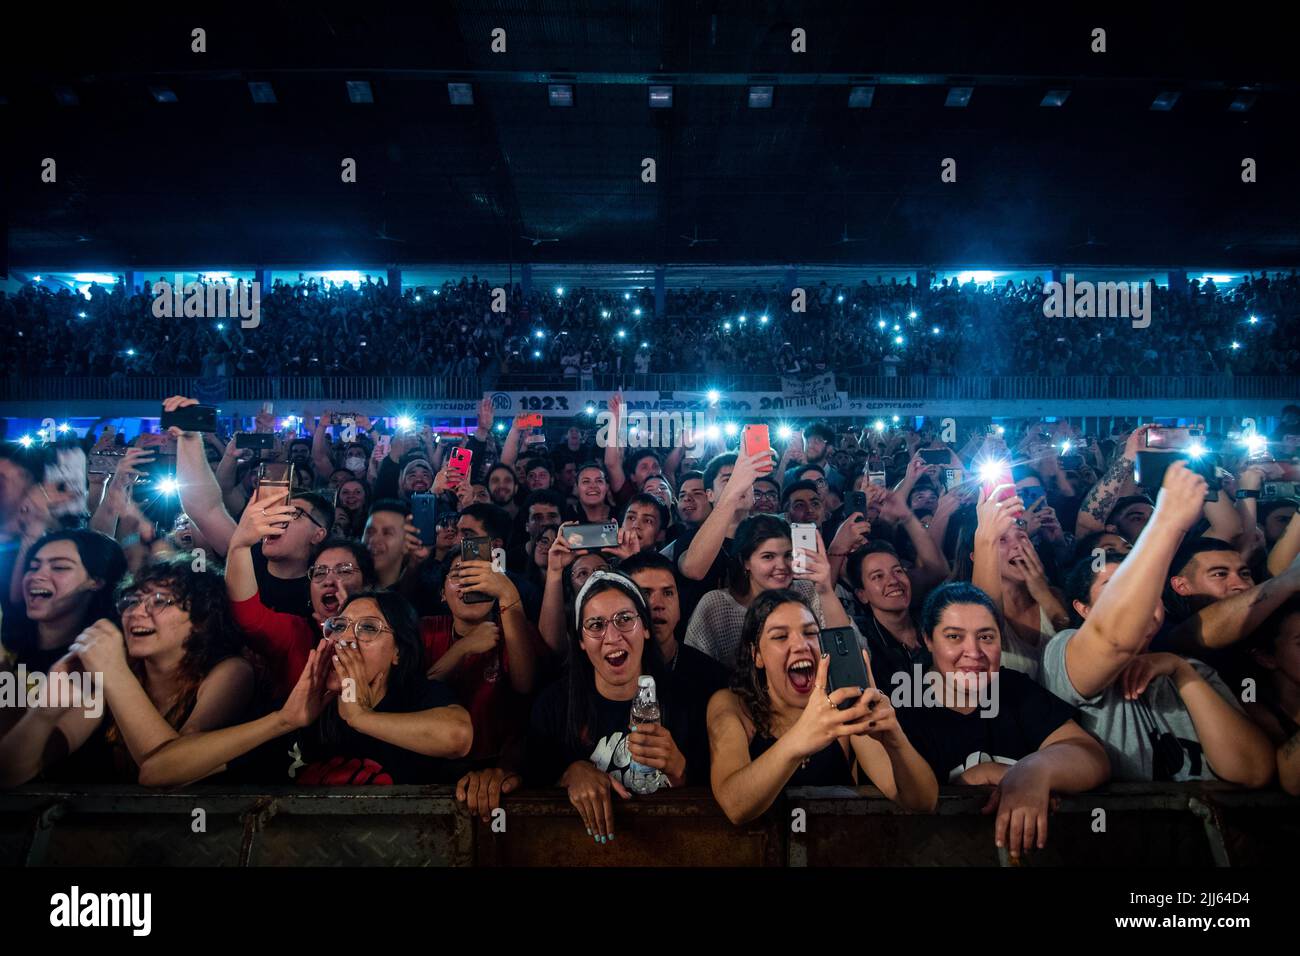 Crowd enjoy the music during the perform of the uruguayan rock band 'No te va a gustar'. Stock Photo